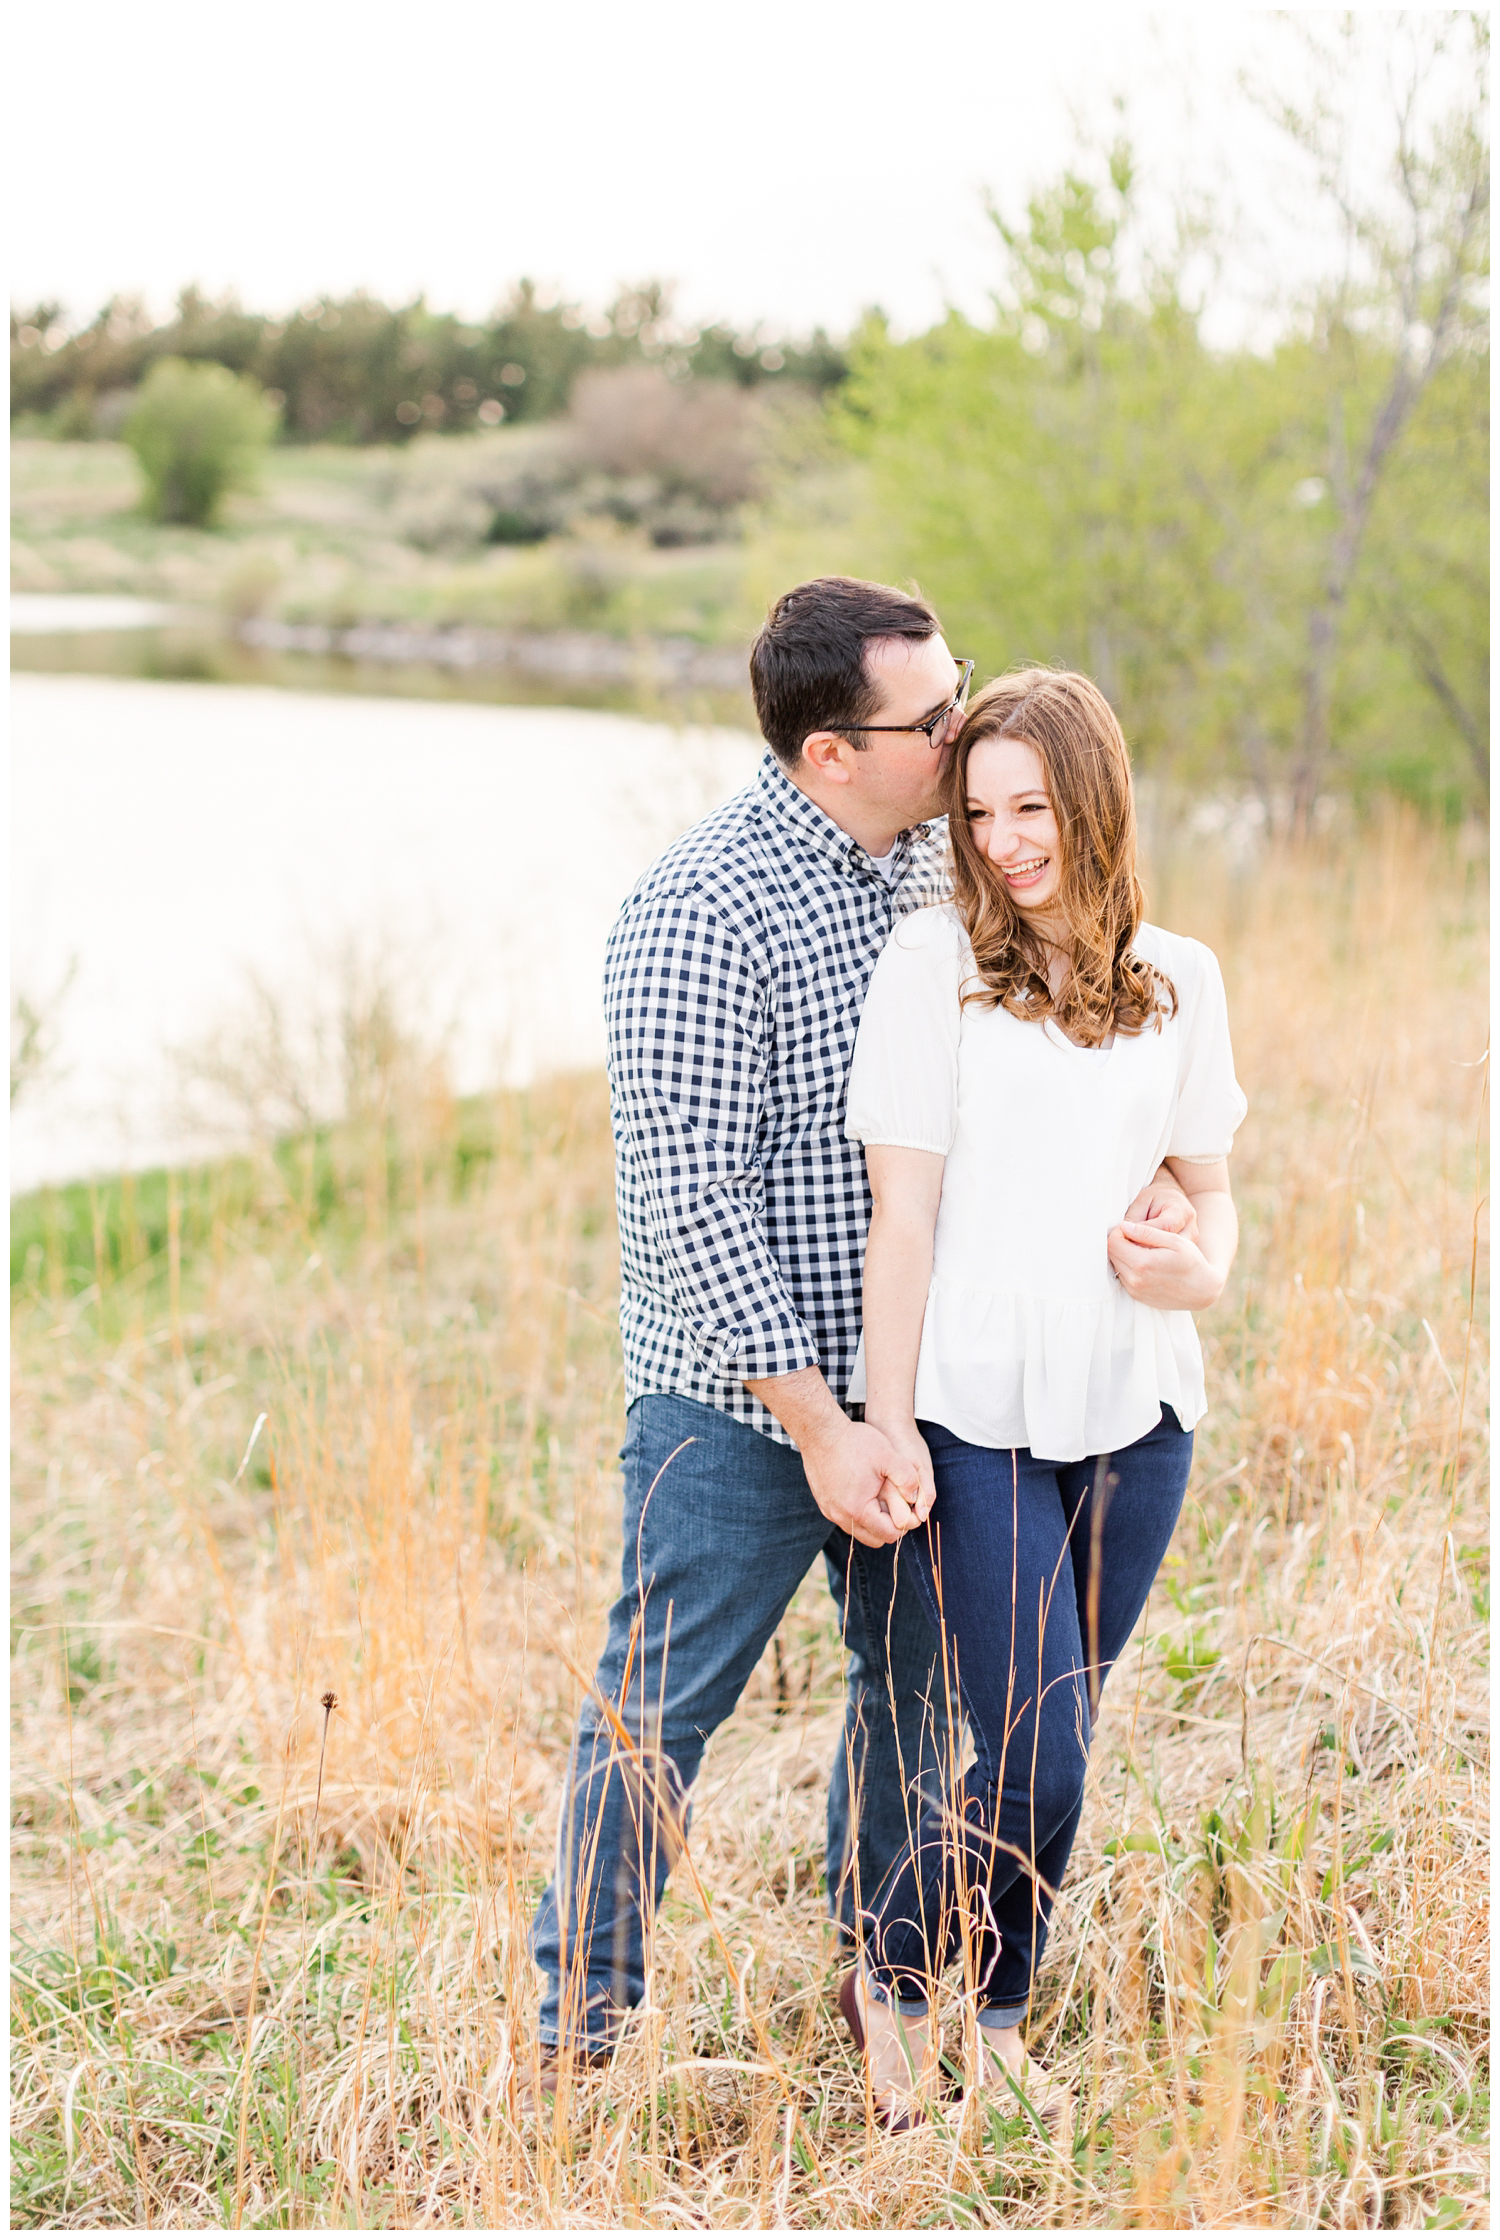 Joe and Leslie embrace in a grassy field with a lake in the background | CB Studio